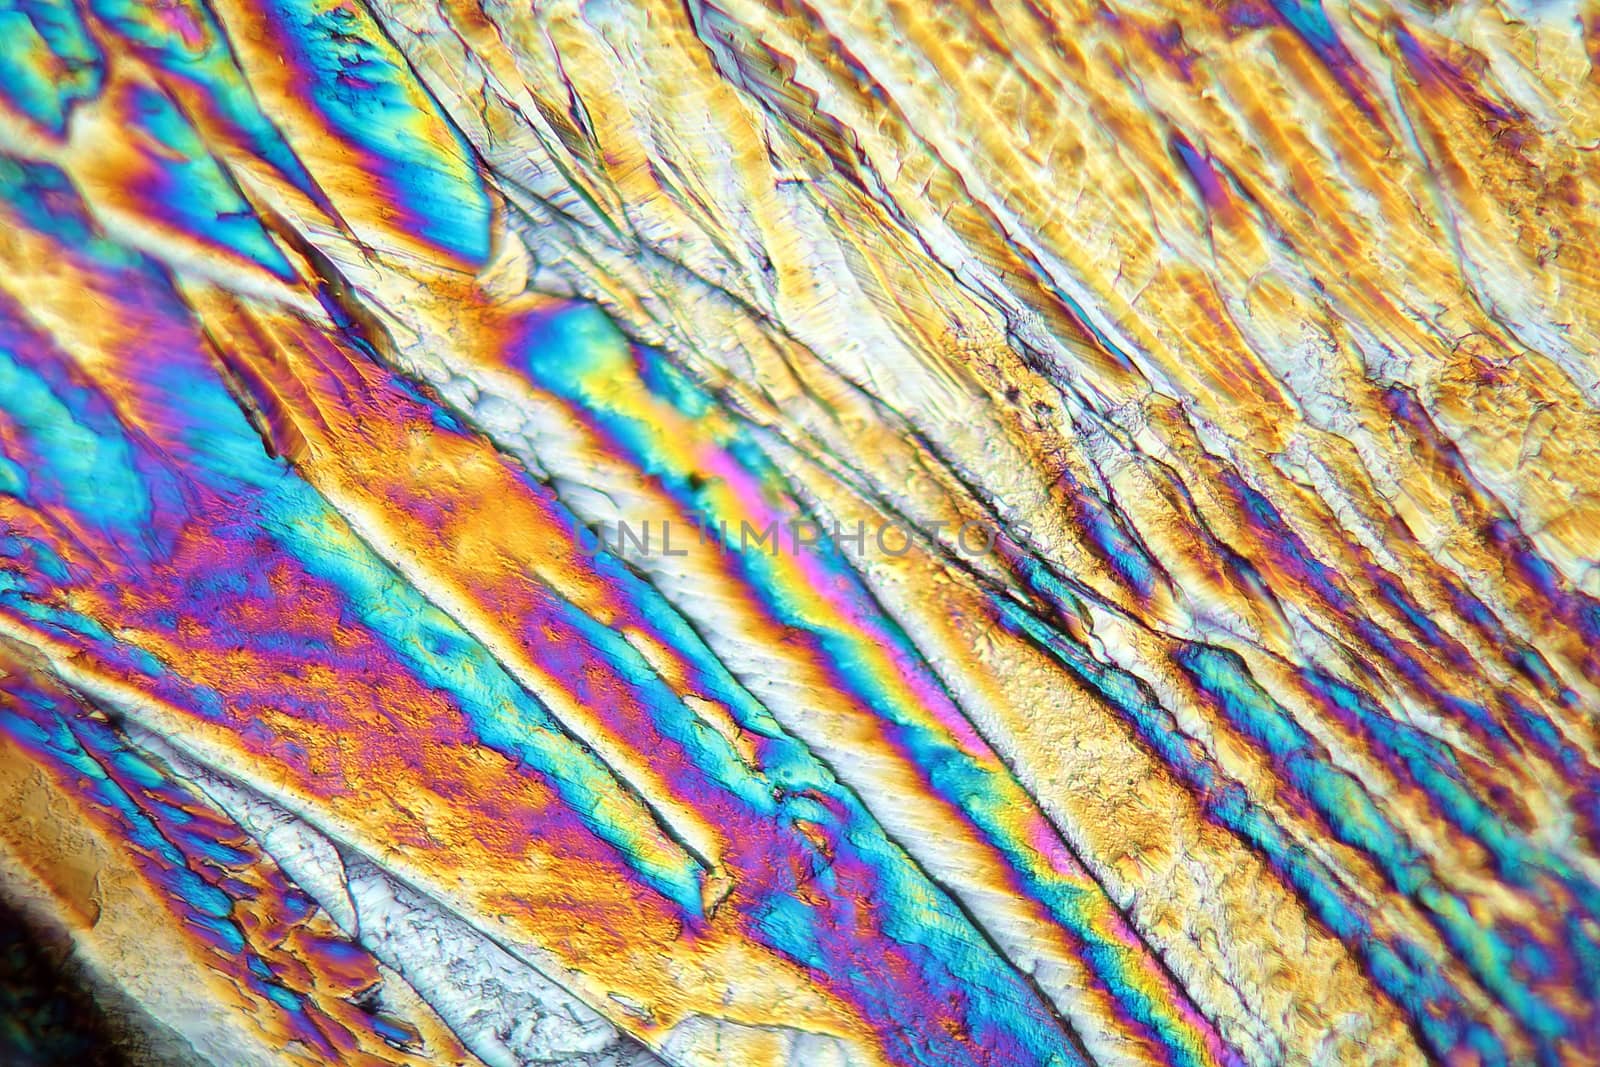 Copper sulfate under the microscope (magnification 80x and polarized light). Copper sulfate is used for many purposes in farming, medicine, industry and science.